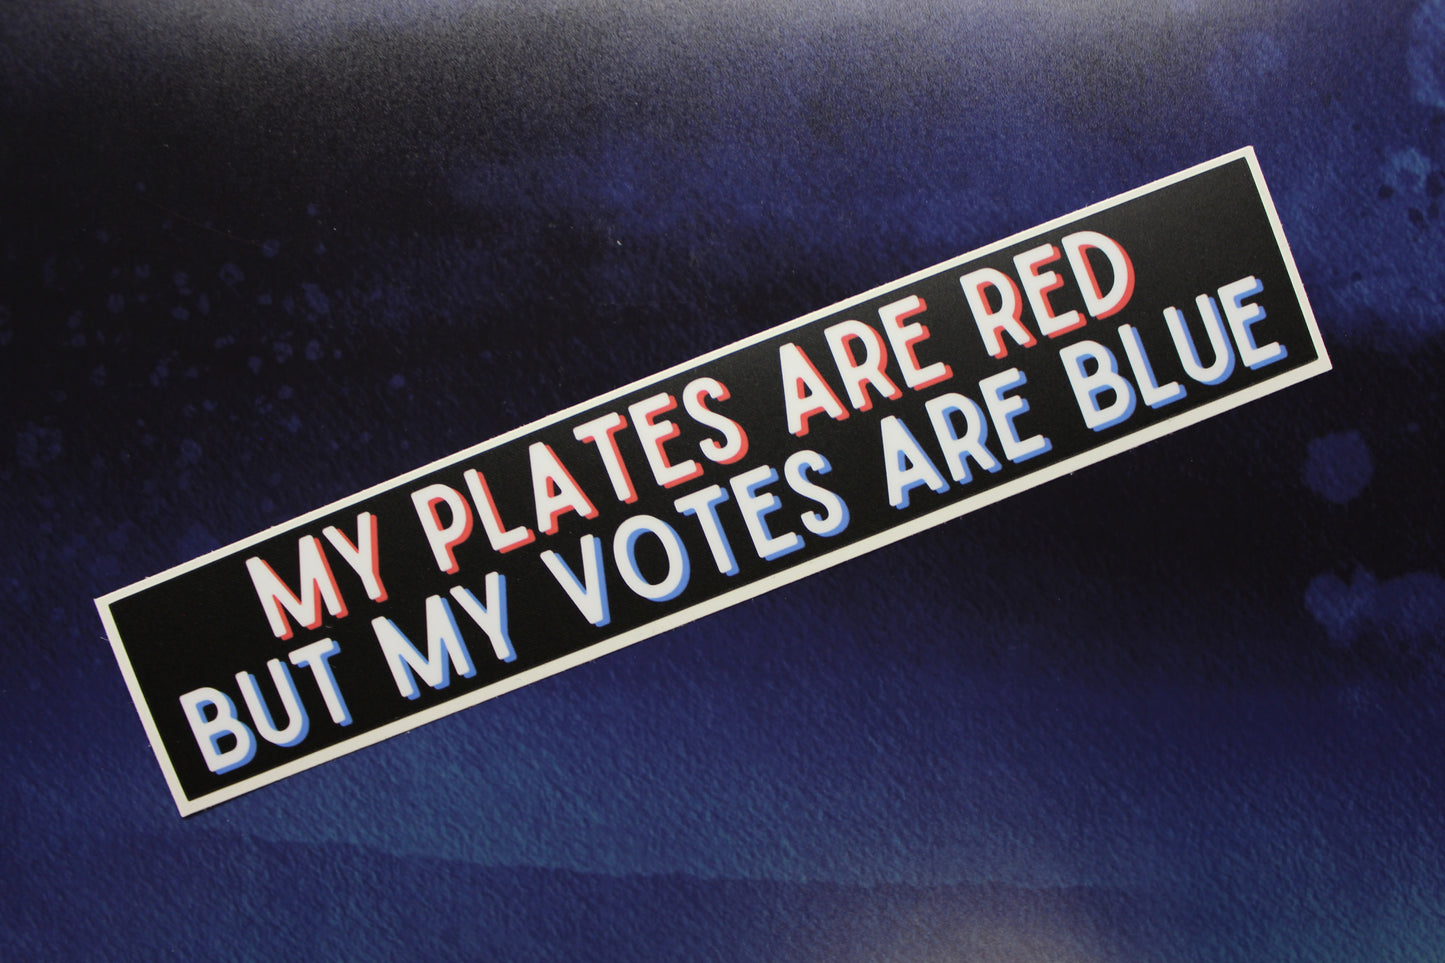 My plates are red but my votes are blue Vinyl Sticker